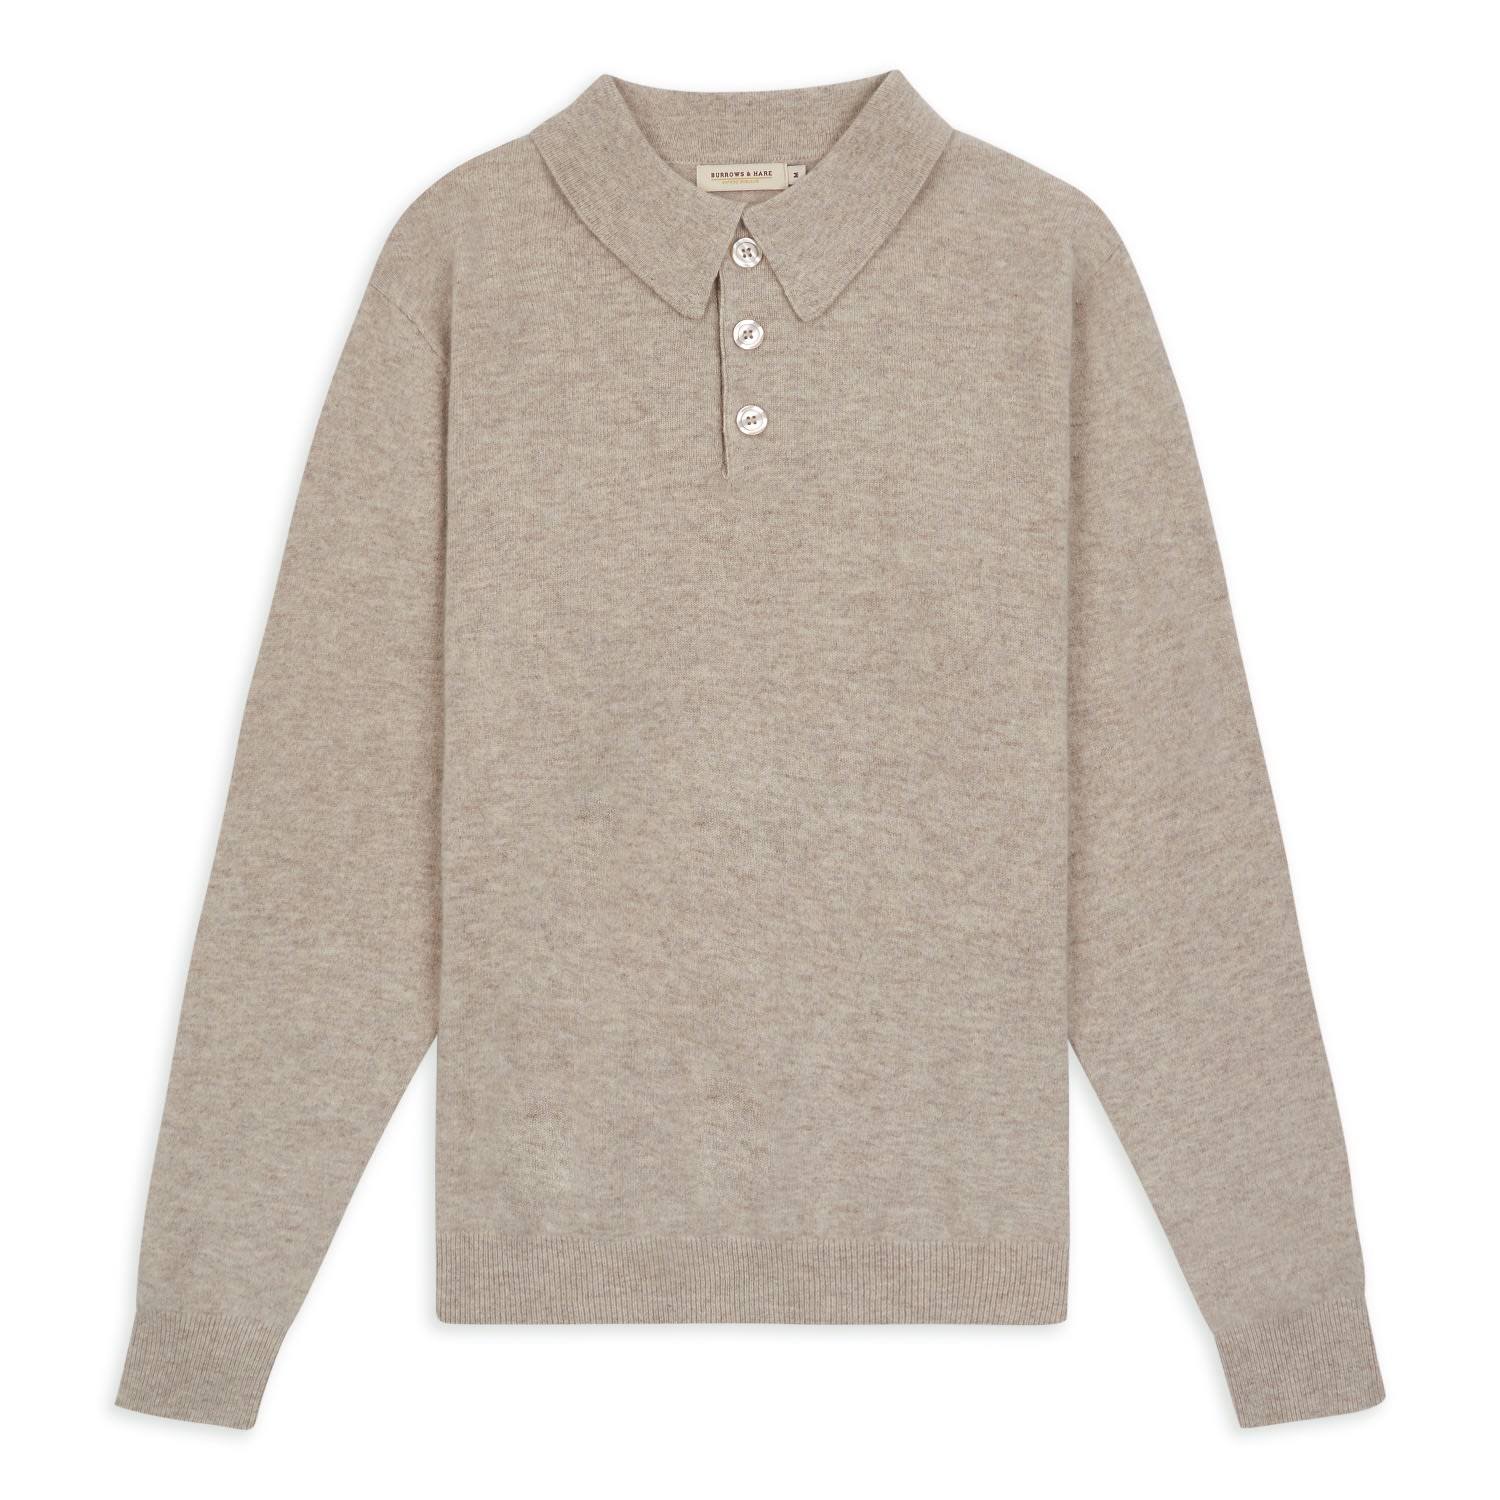 Men’s Neutrals Knitted Polo - Wheat Small Burrows & Hare